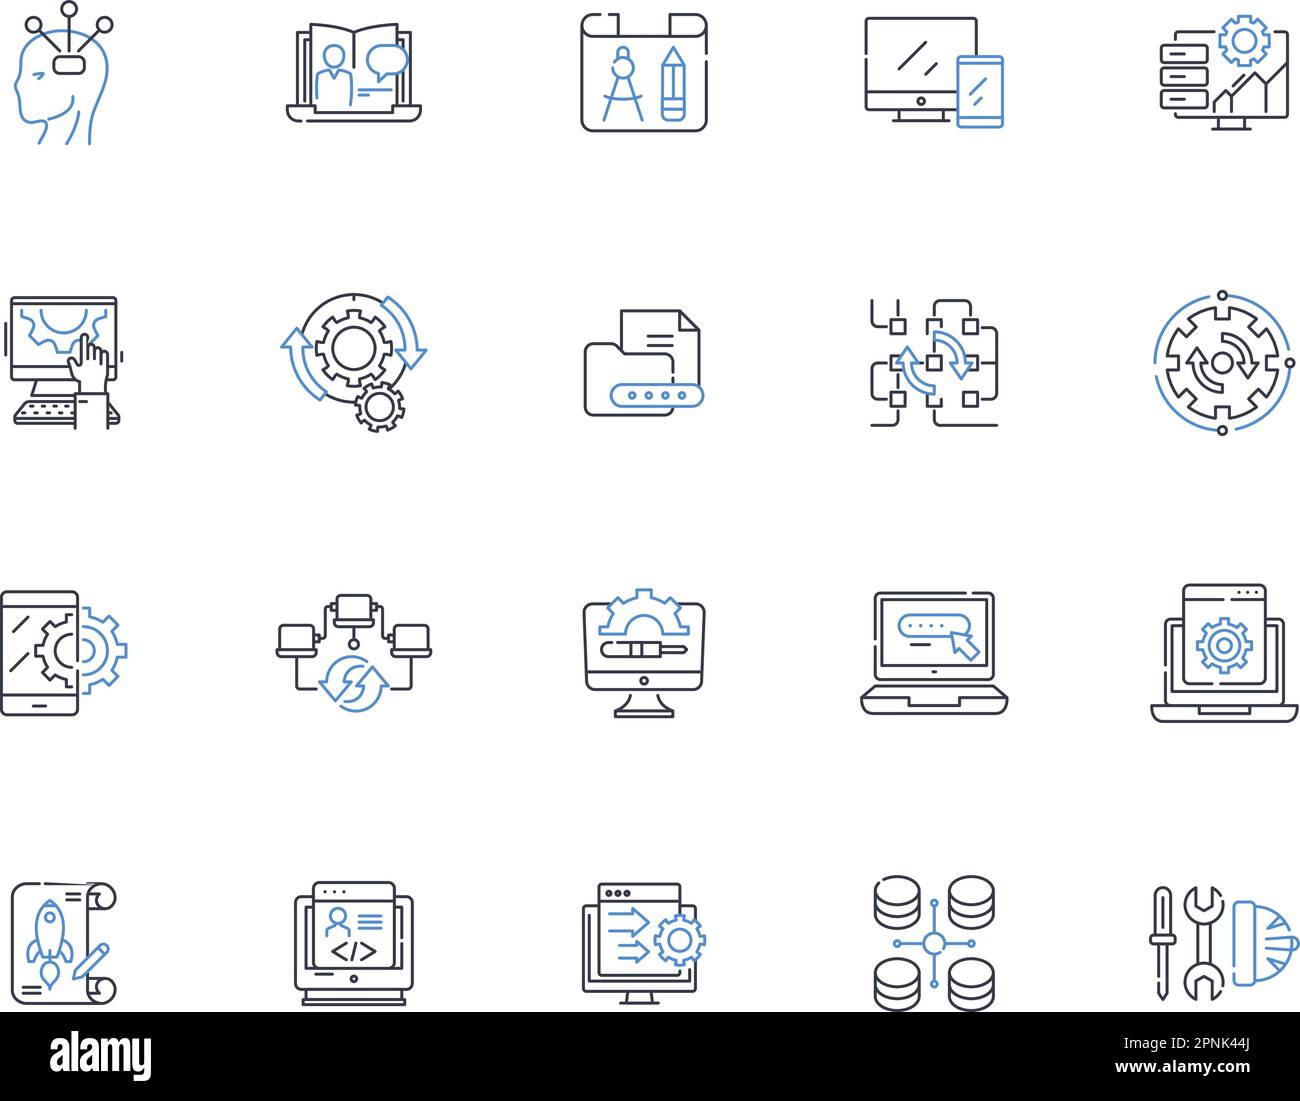 Programming language line icons collection. Syntax, Compiler, Debugger, Variable, Function, Object, Class vector and linear illustration. Method Stock Vector